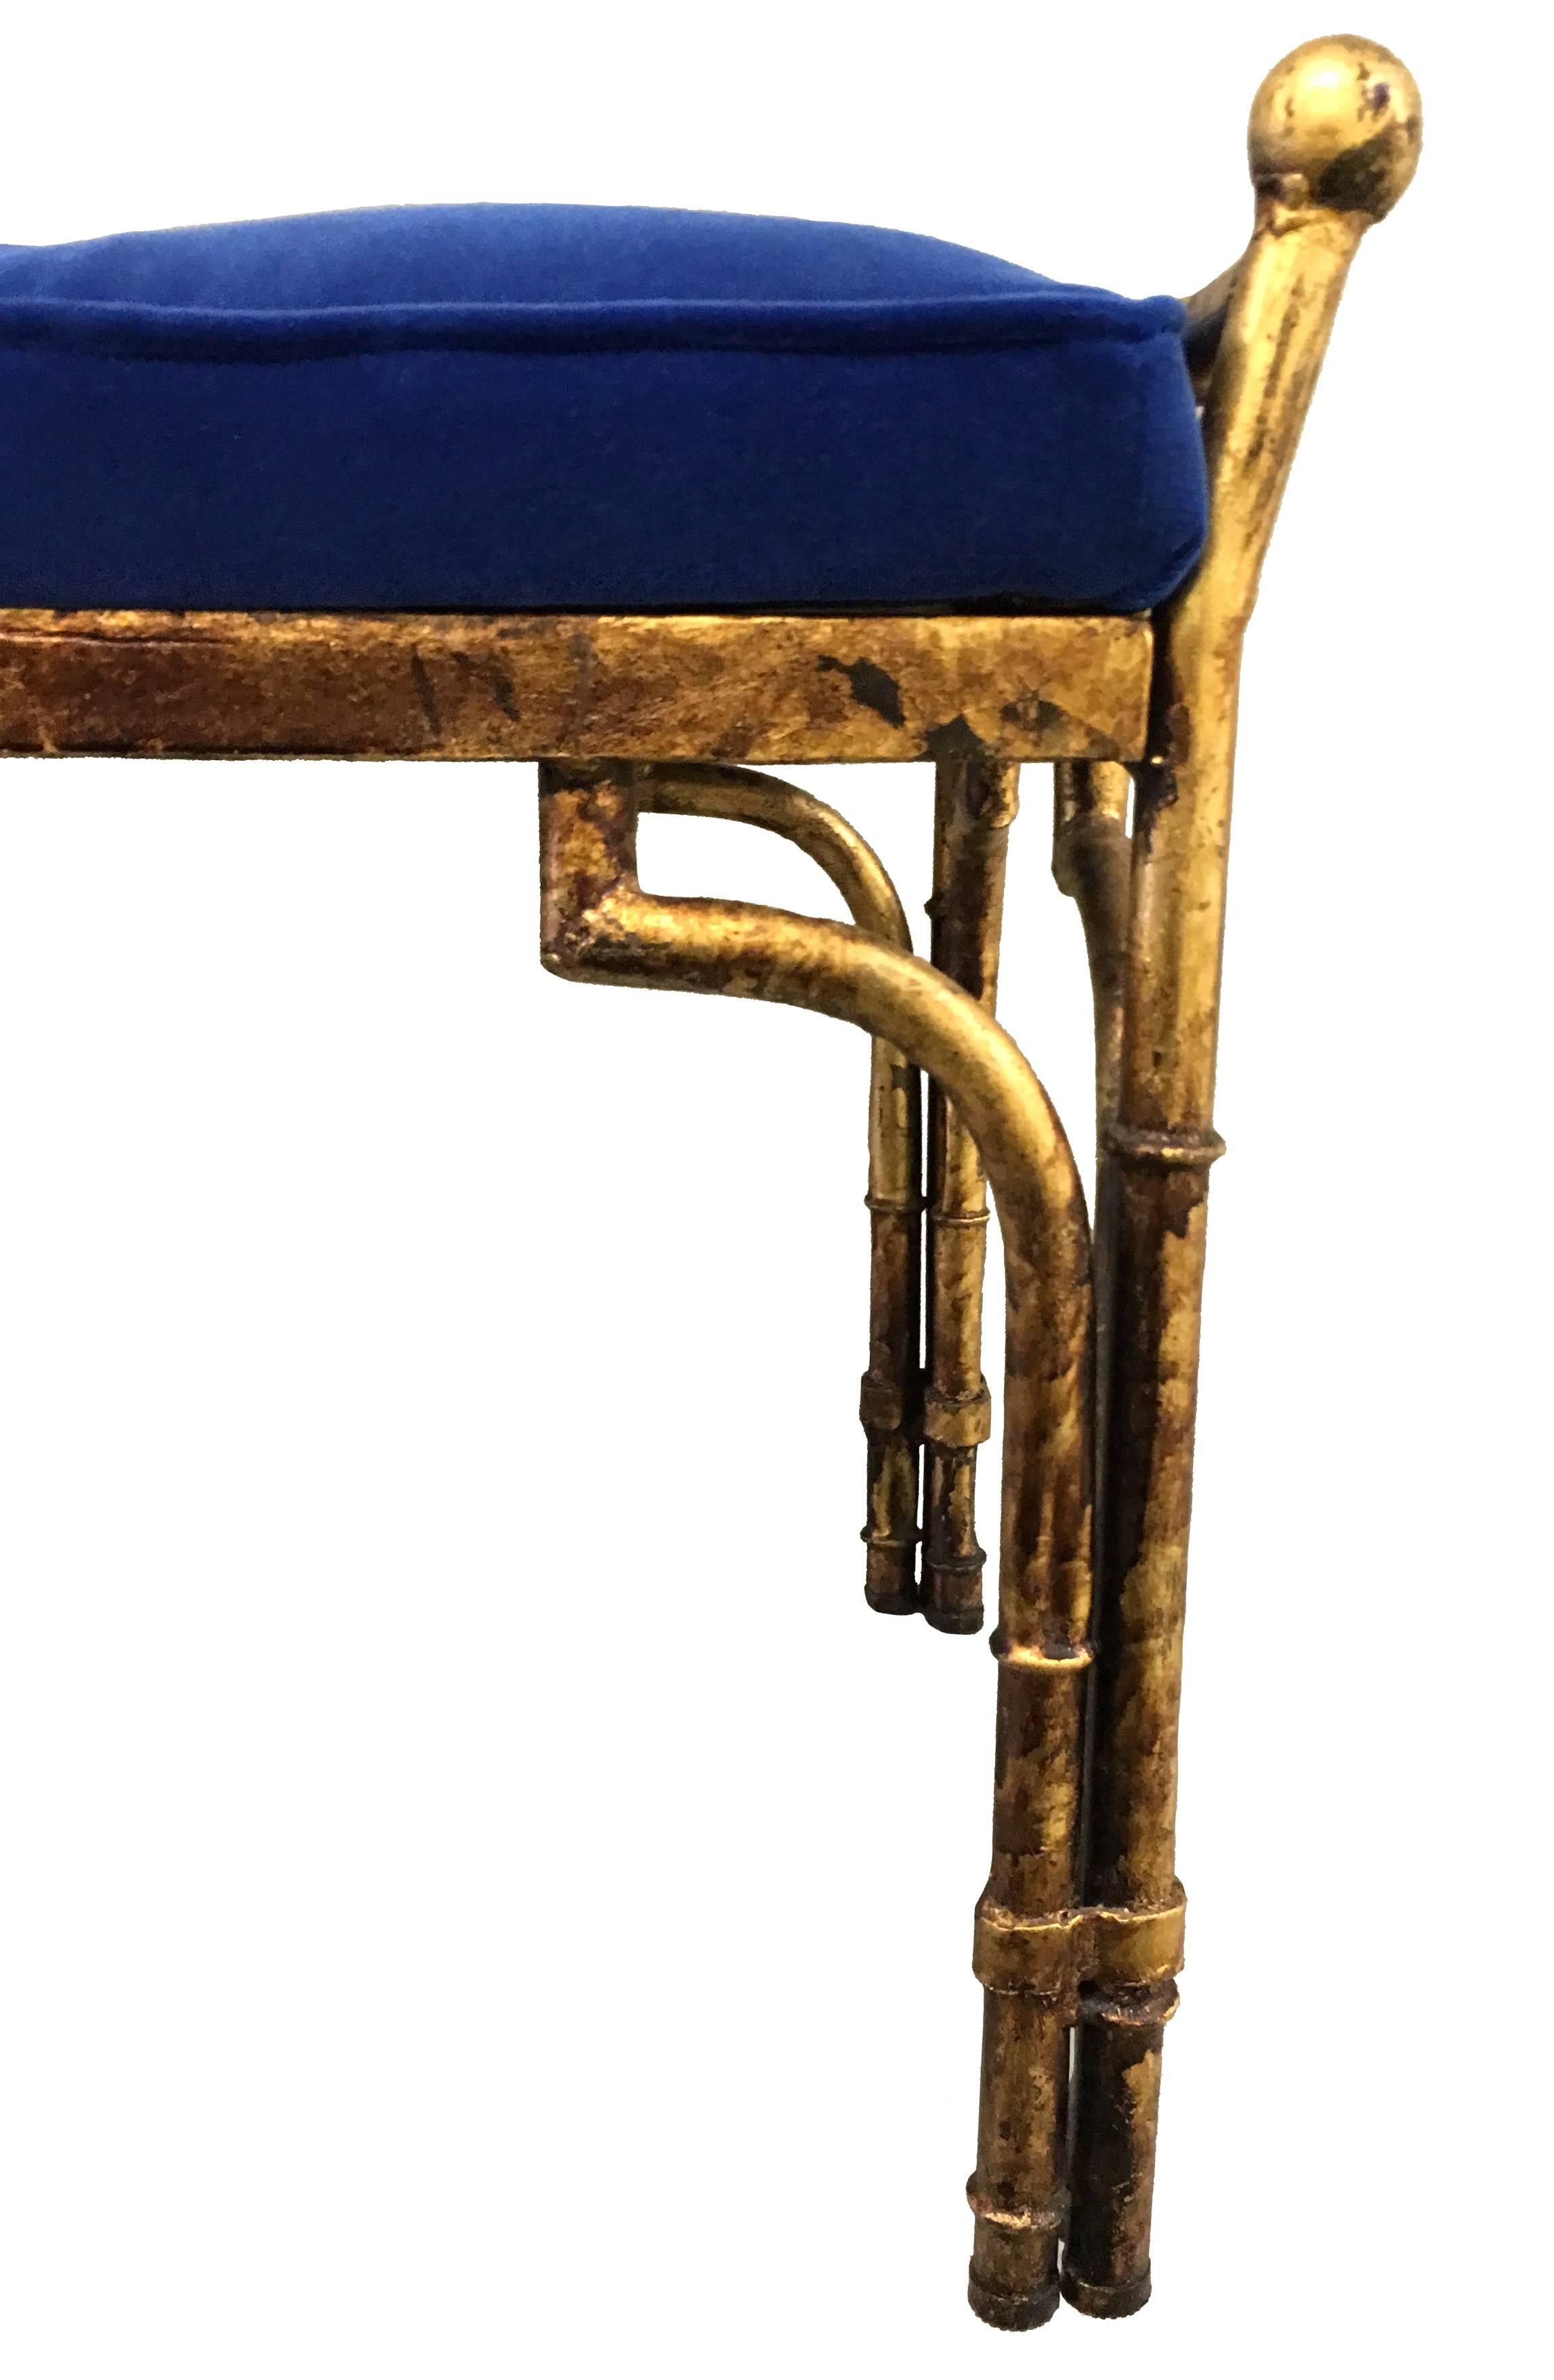 Gold gilt metal faux bamboo bench by Labarge. Newly upholstered in sapphire blue velvet fabric with tufted detailing.